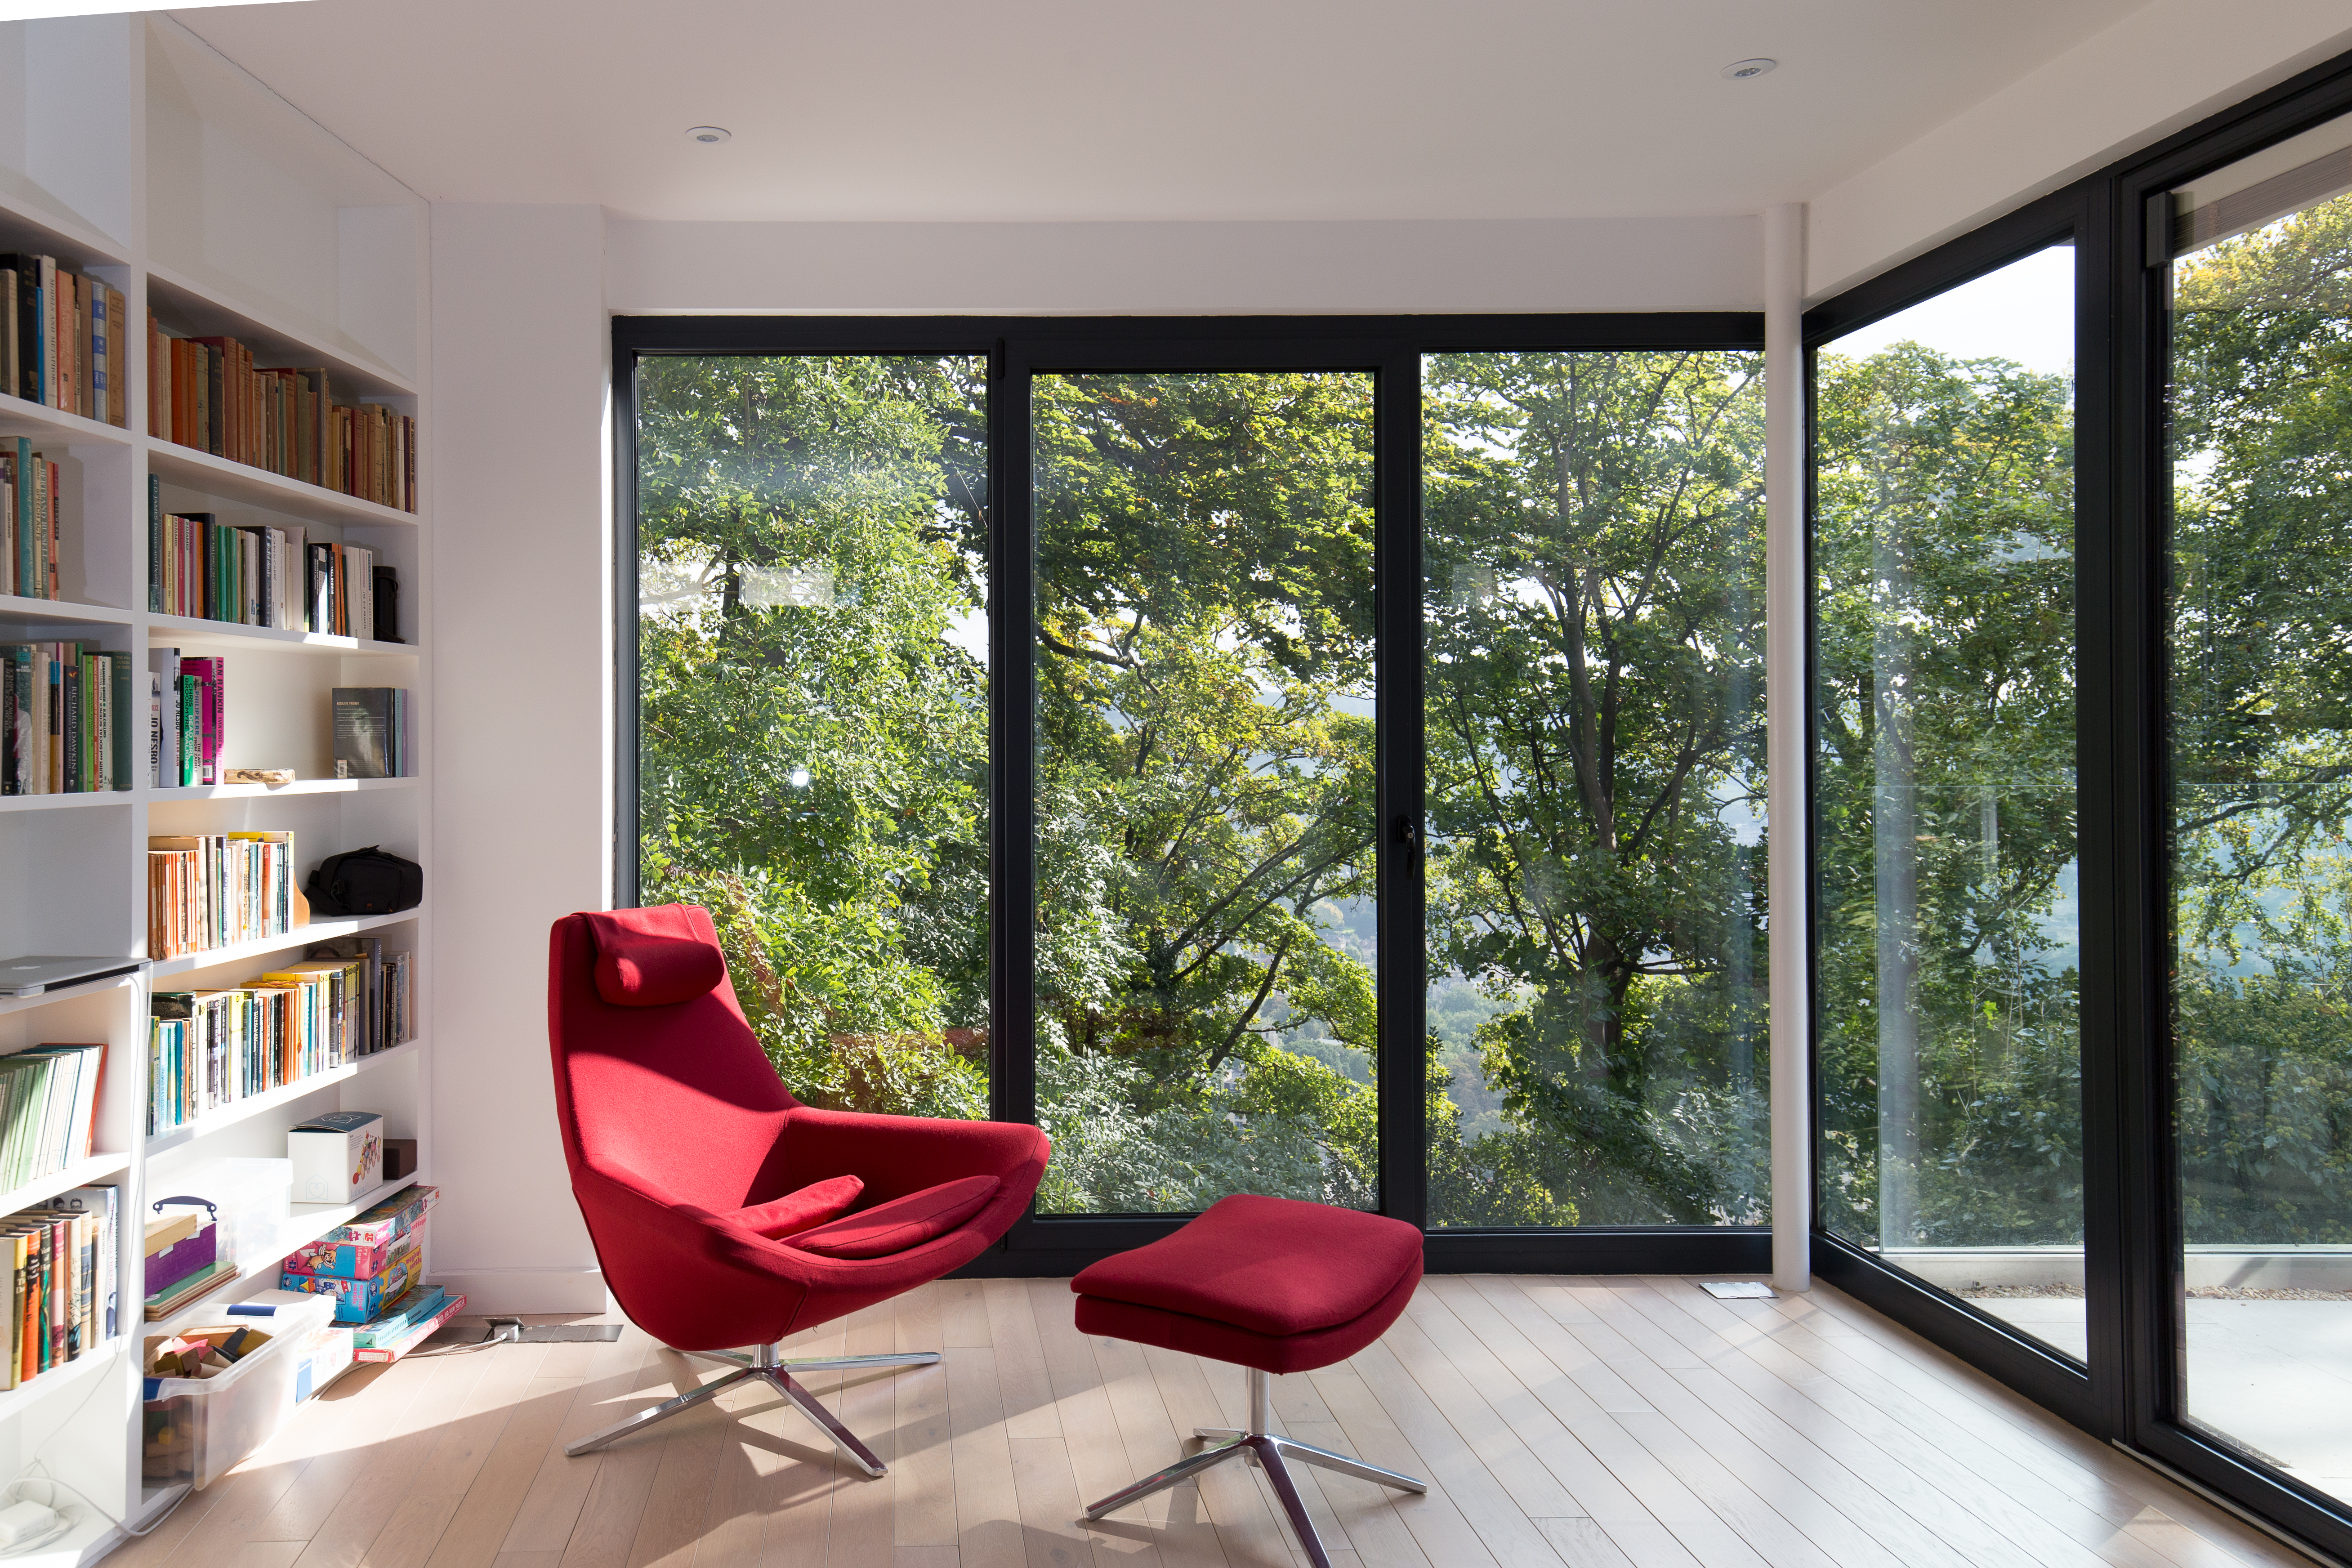 Photograph of the interior view of the writing room, a large red chair is positioned with views out towards the greenery beyond. The room has large full height glazing and sliding doors opening onto raised terrace deck.